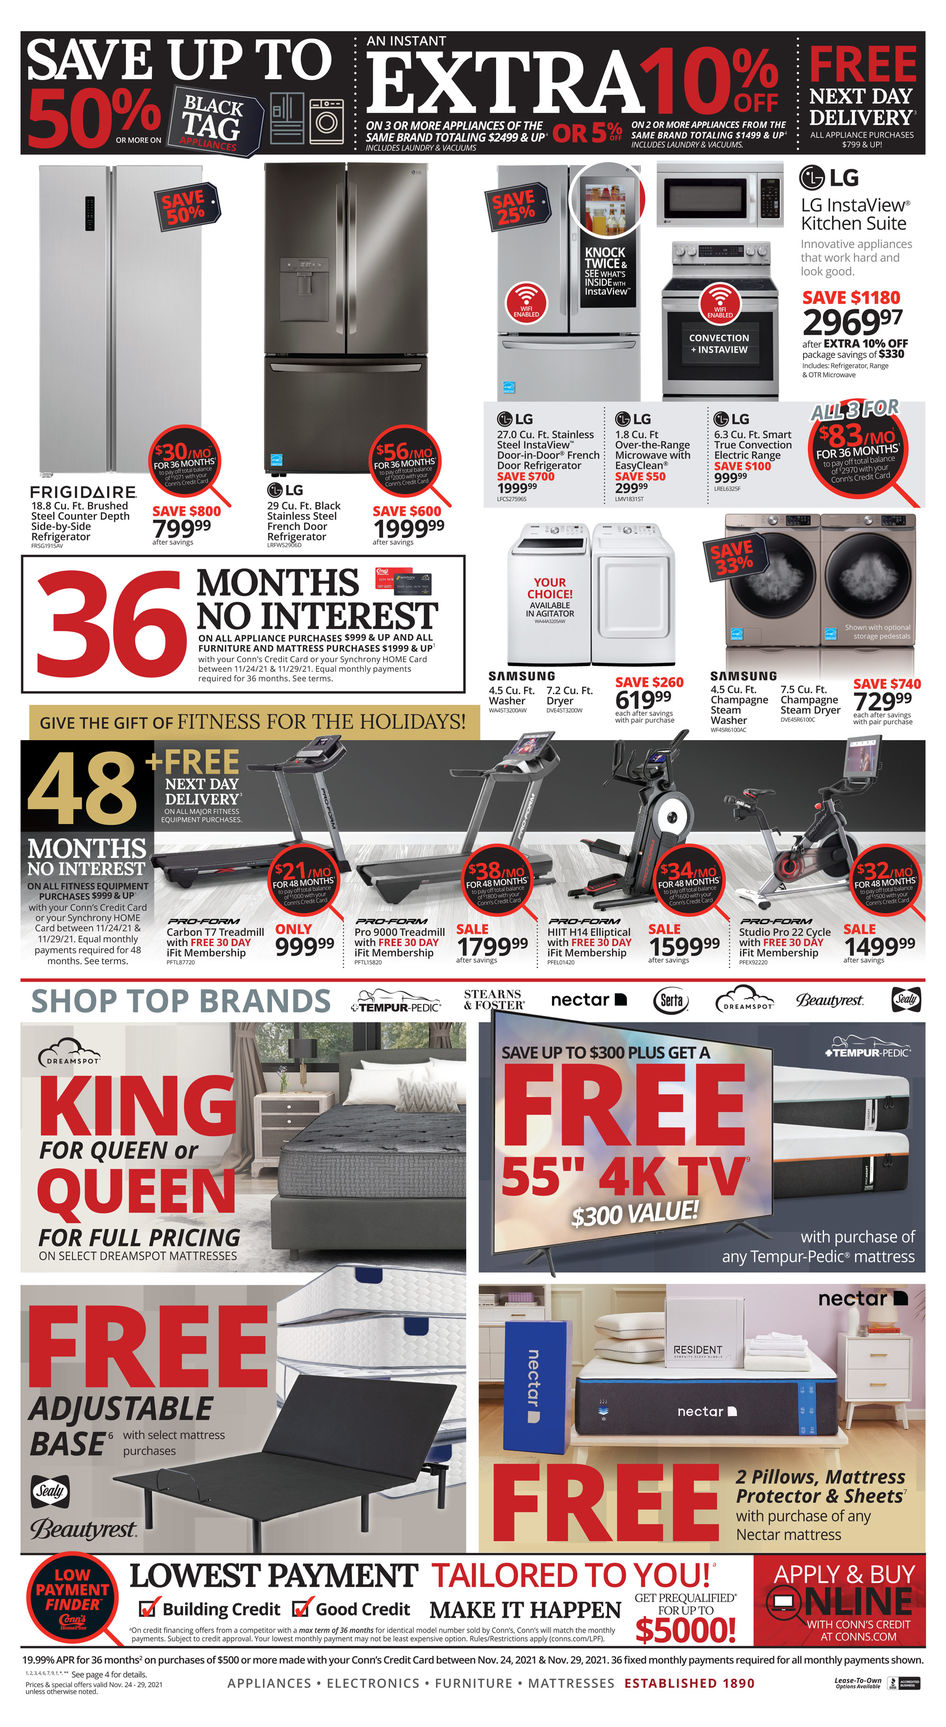 Conn's HomePlus 2021 Black Friday Ad Page 8